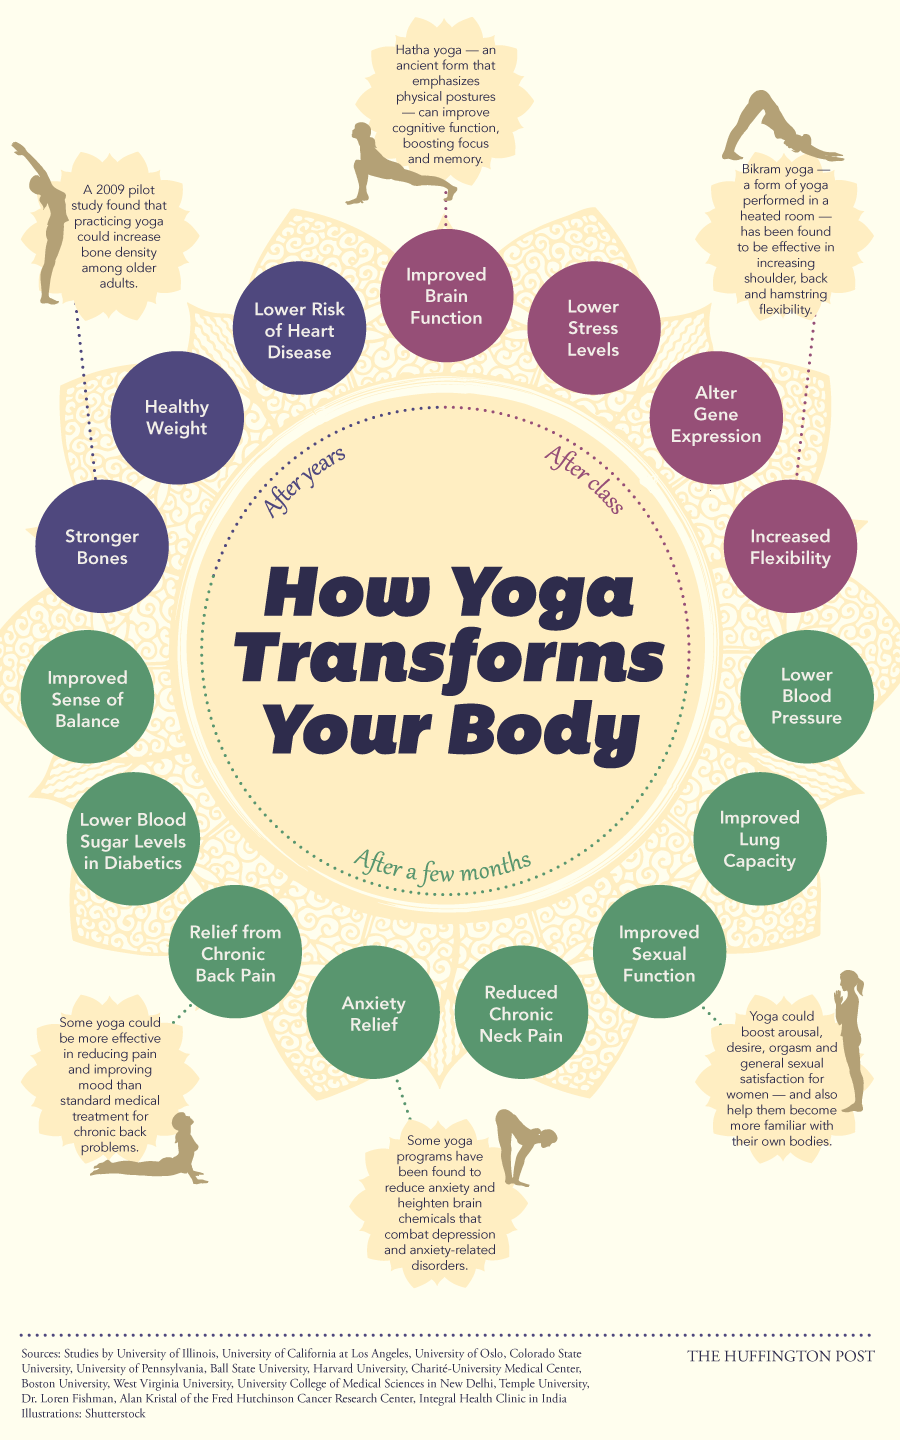 How Yoga Changes Your Body,